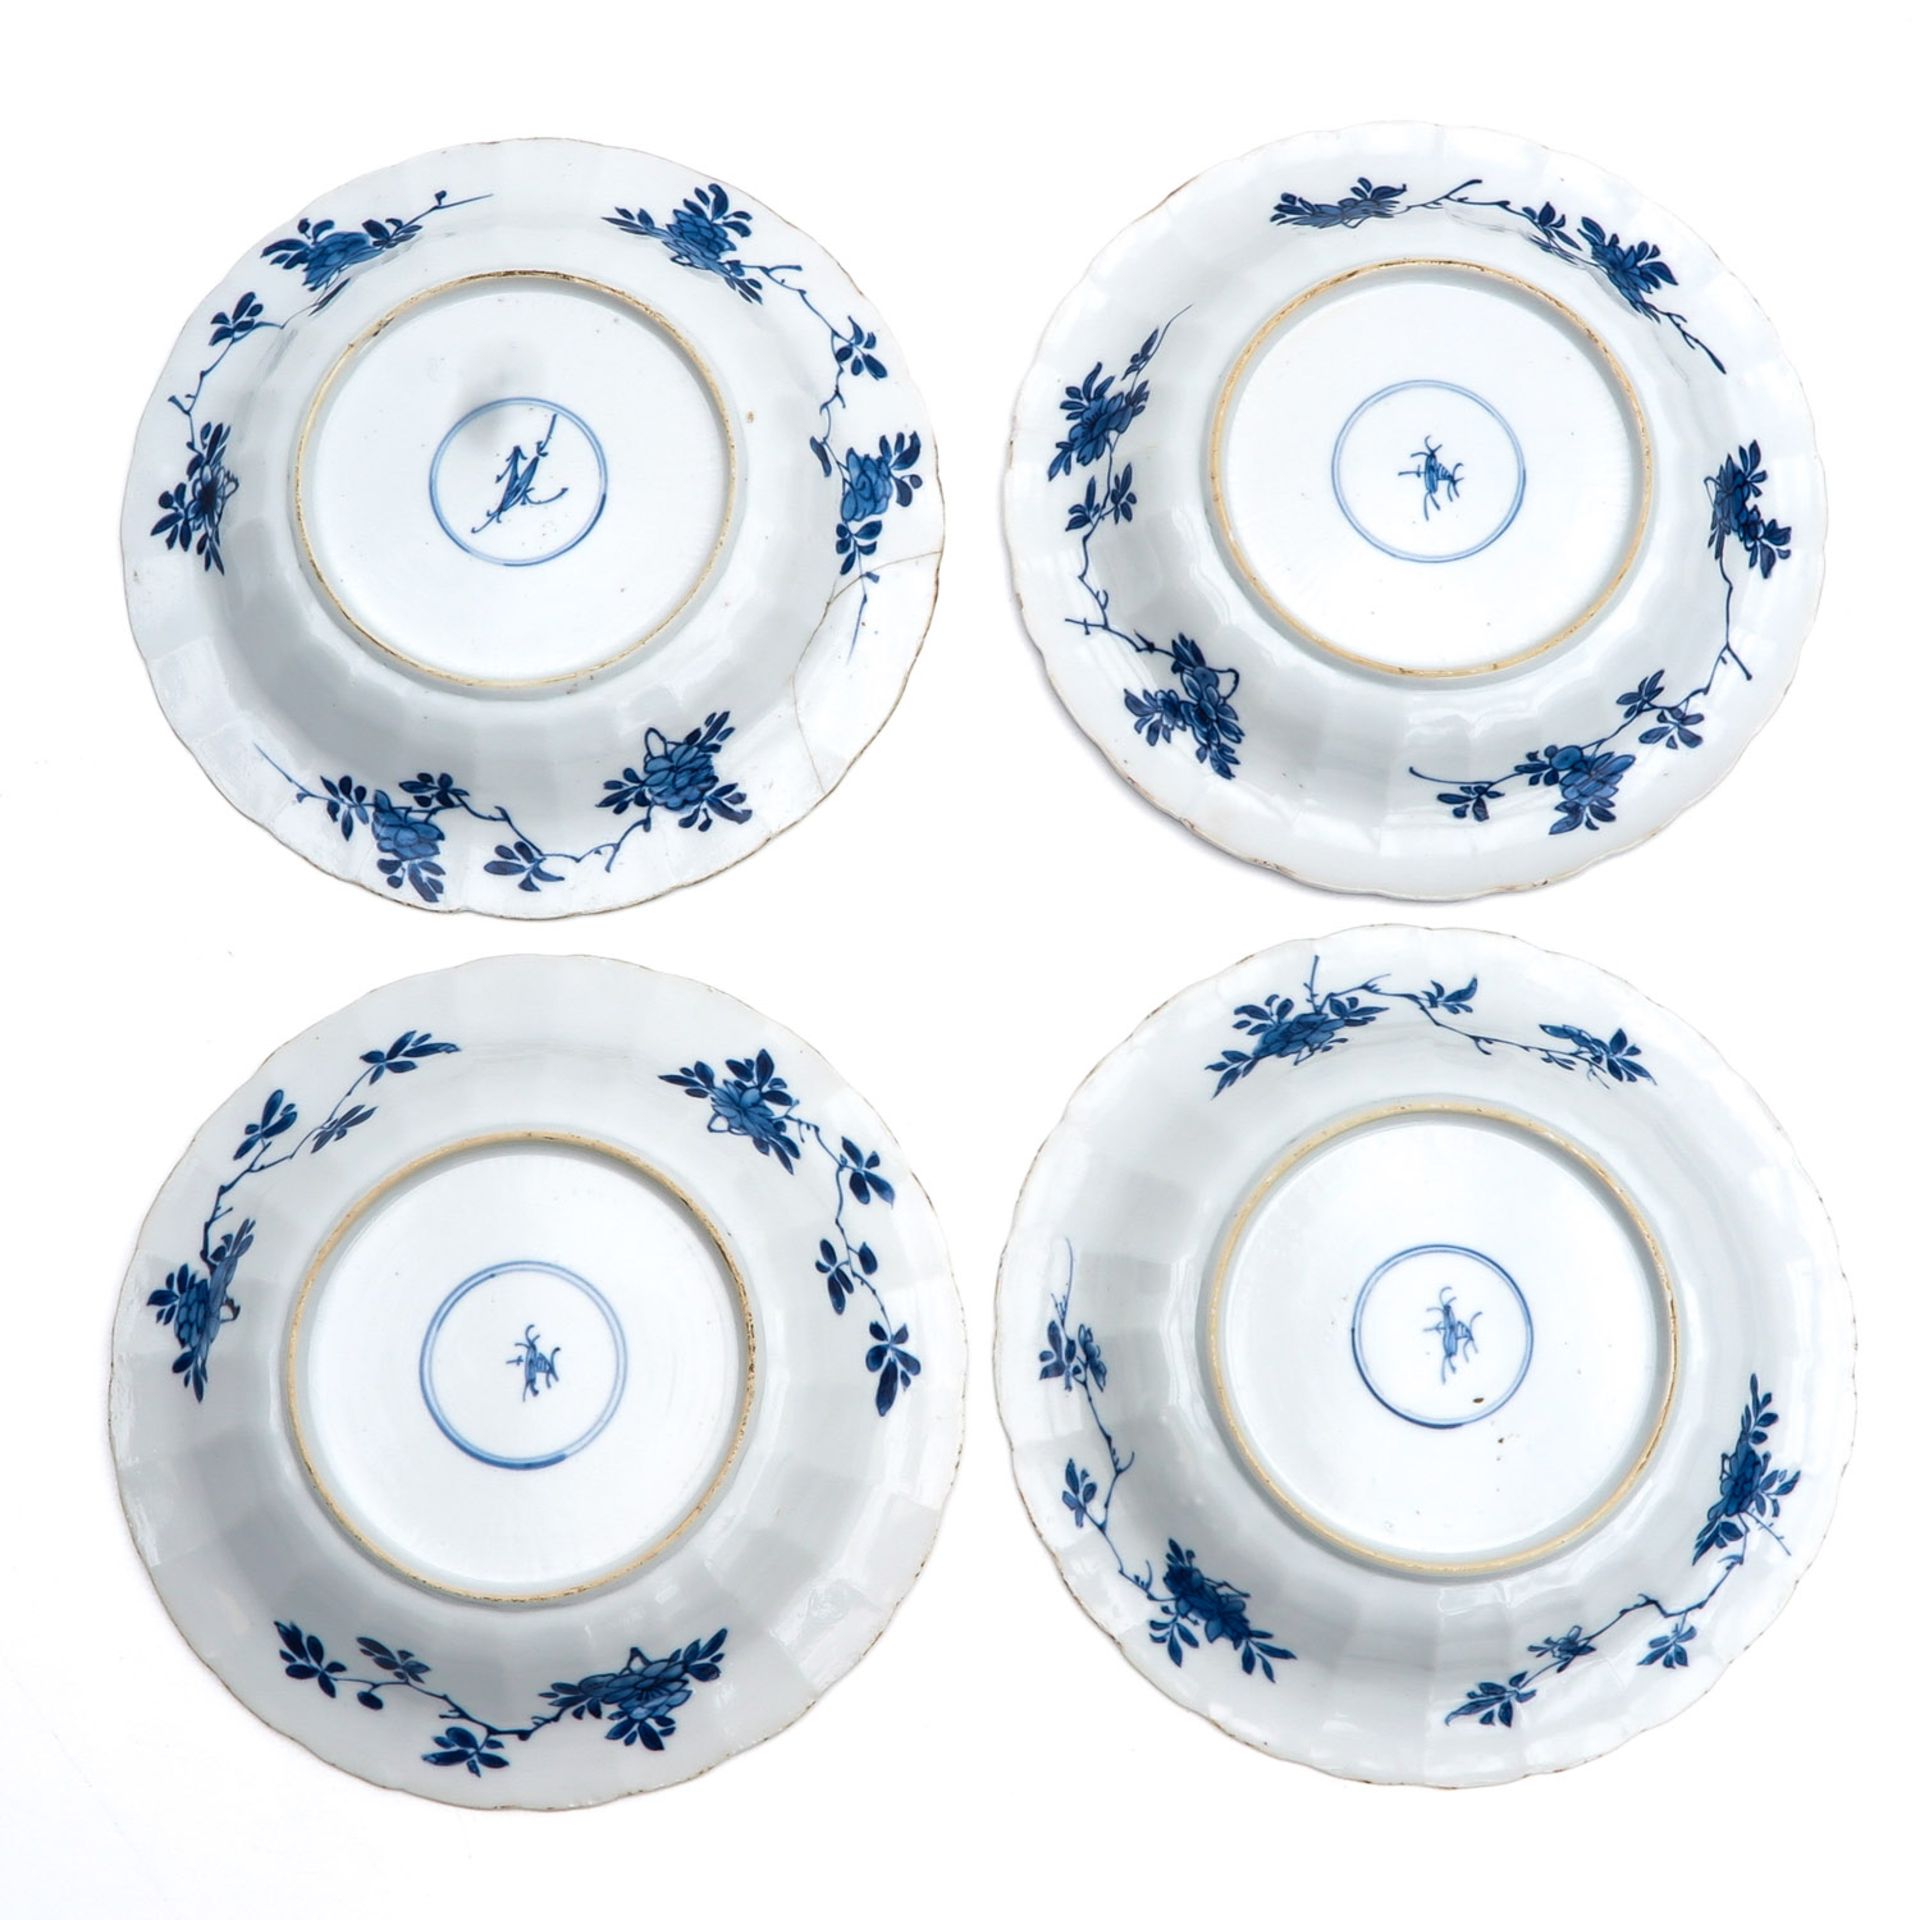 A Series of 4 Blue and White Plates - Image 2 of 9